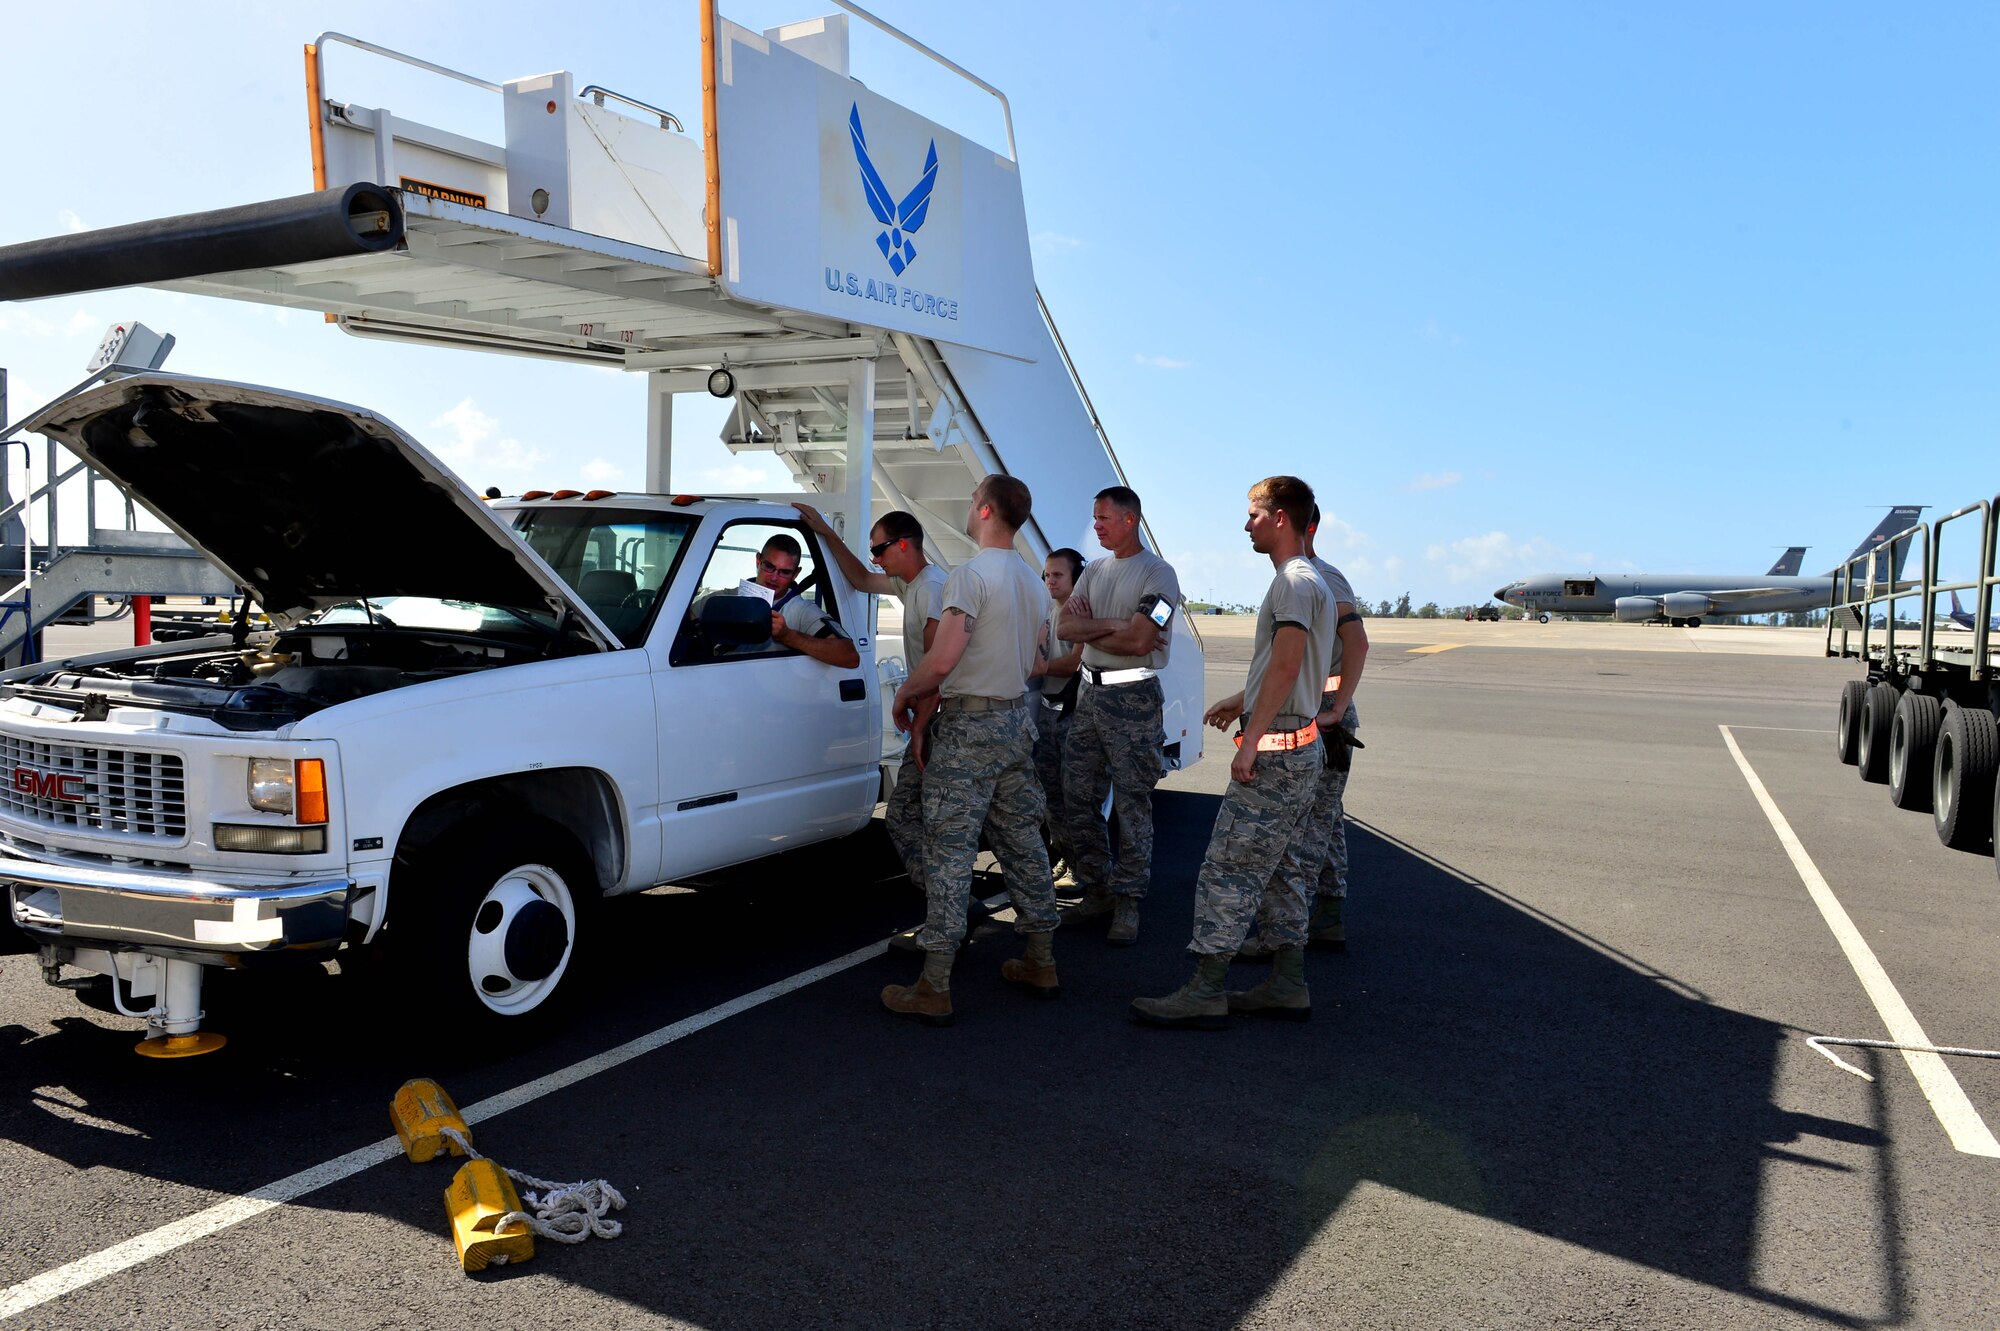 Airmen from the 32nd Aerial Port Squadron, Pittsburgh Air Reserve Station conduct an inspection of a staircase truck during annual training on Joint Base Pearl Harbor-Hickam, April 14, 2016. Approximately 30 Airmen from the 32nd APS traveled to JBPHH to conduct annual training hosted by the Airmen of the 735th Air Mobility Squadron. (U.S. Air Force photo by Tech. Sgt. Aaron Oelrich/Released)